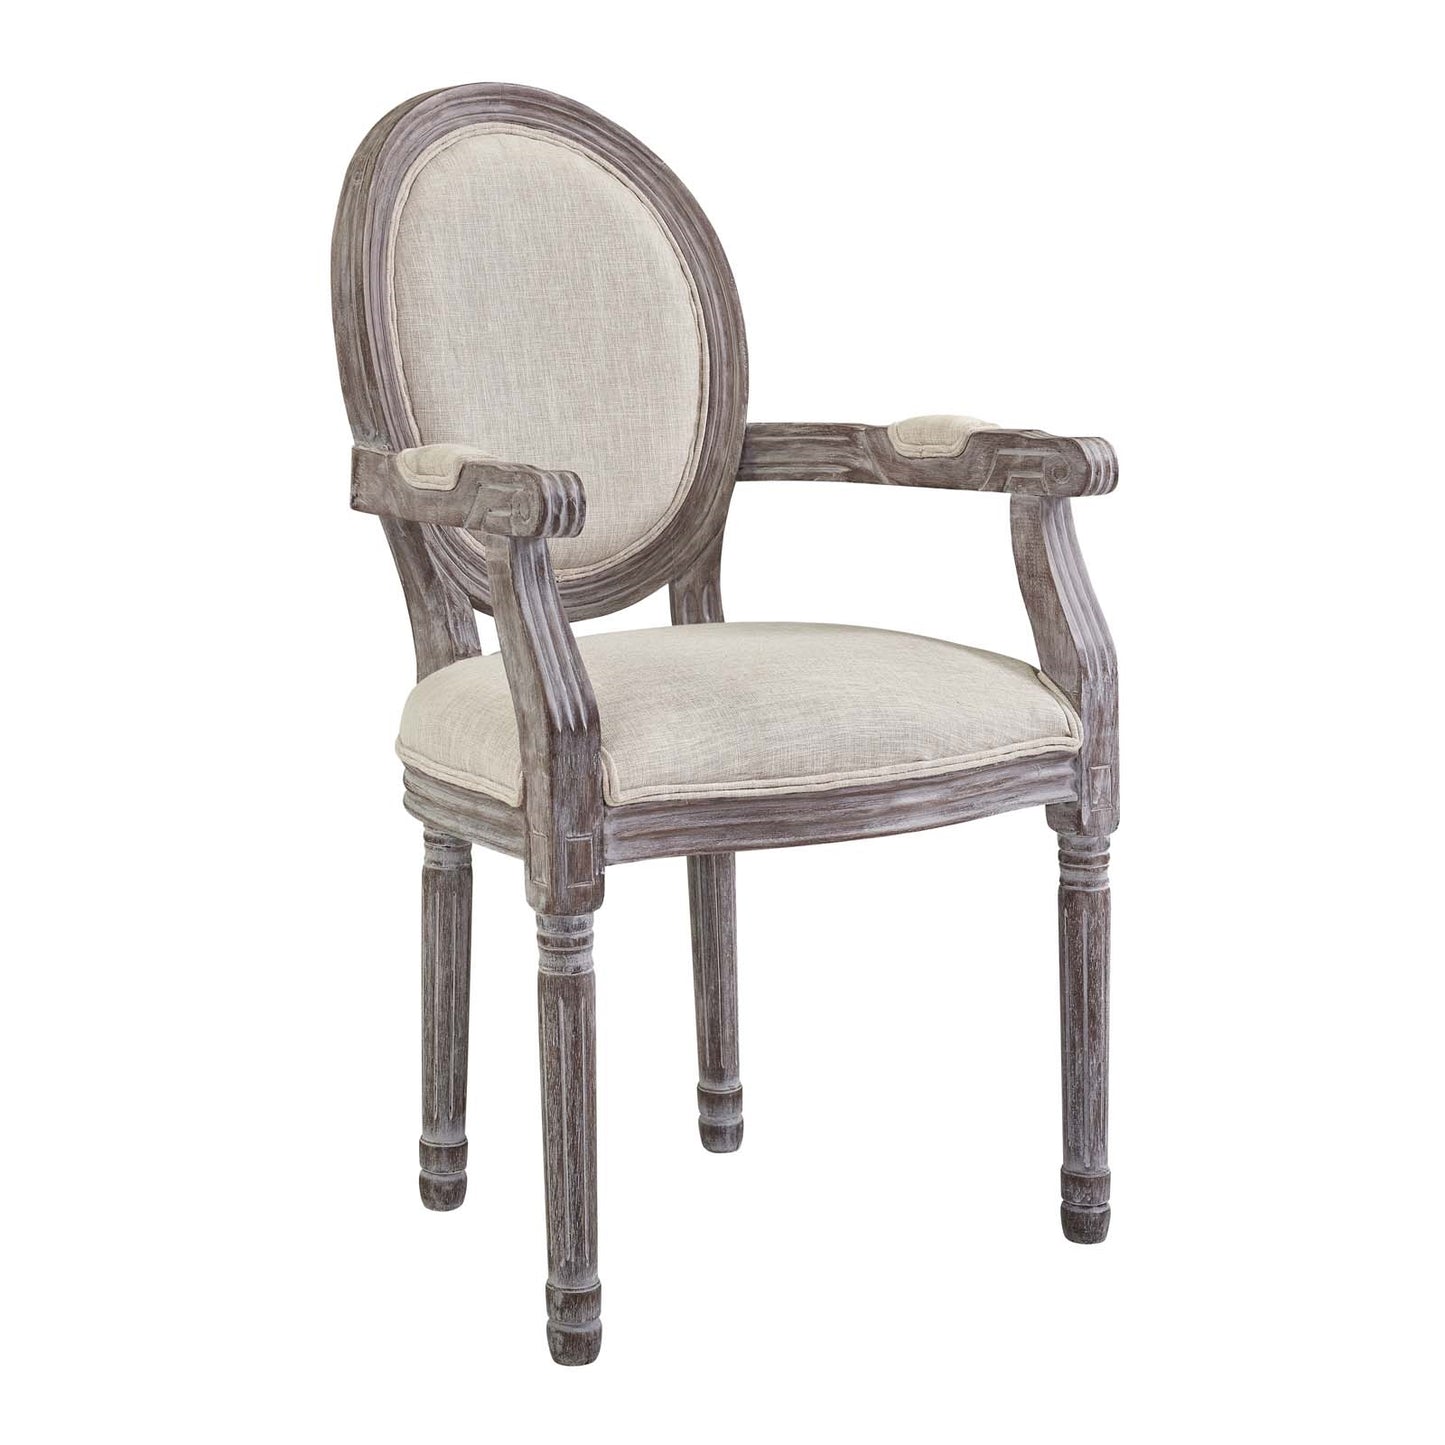 Emanate Vintage French Upholstered Fabric Dining Armchair - (SET OF 2) Beige